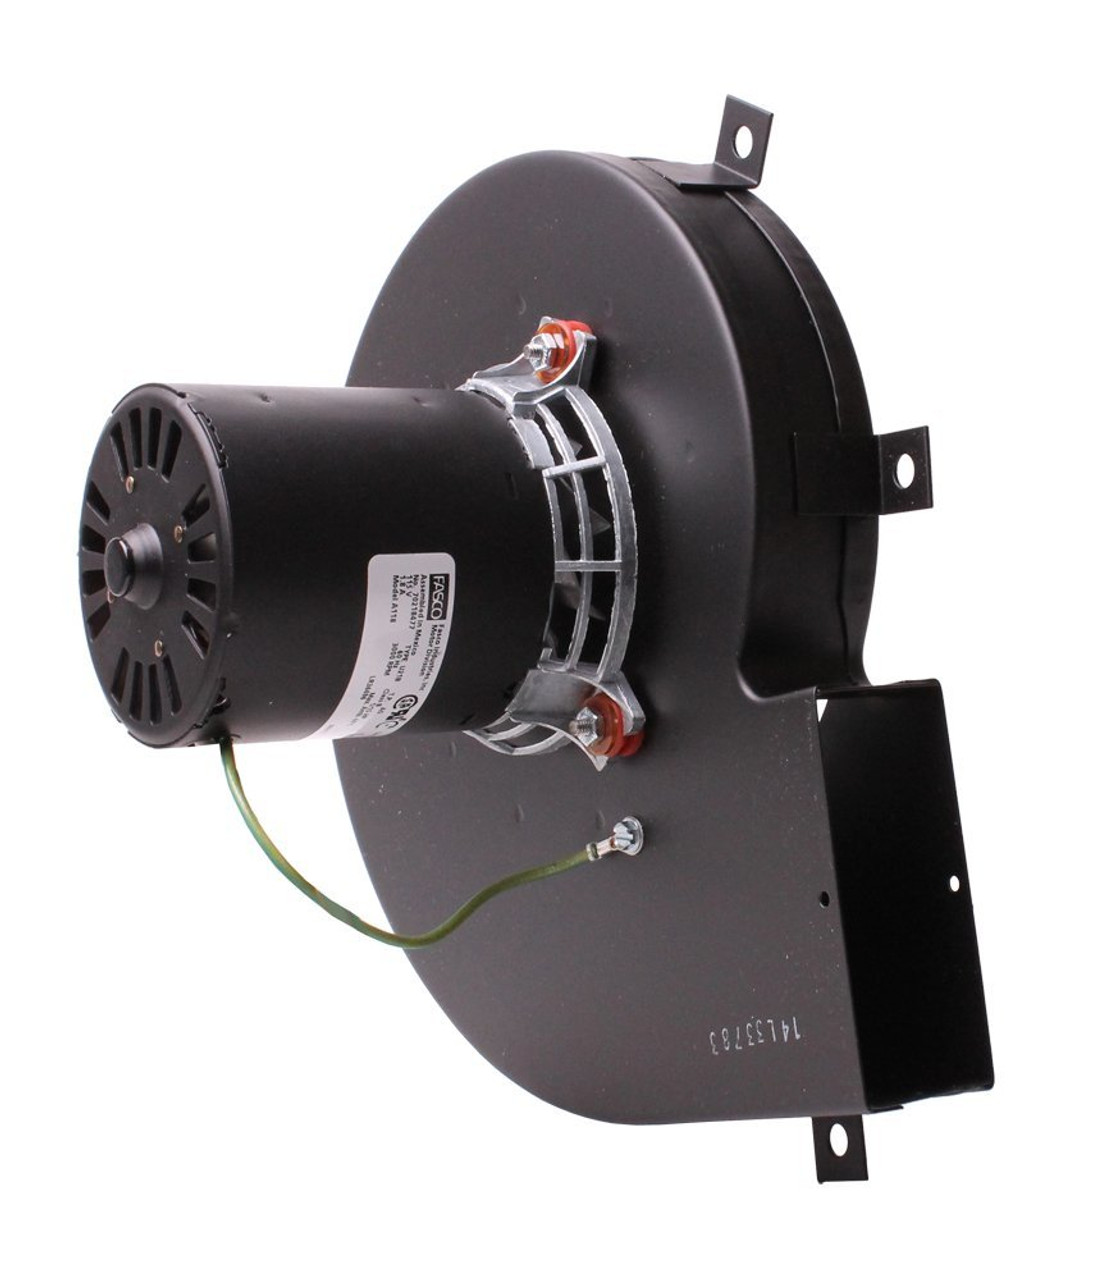 A118 Fasco, Williamson Furnace Draft Inducer Blower 115 Volts